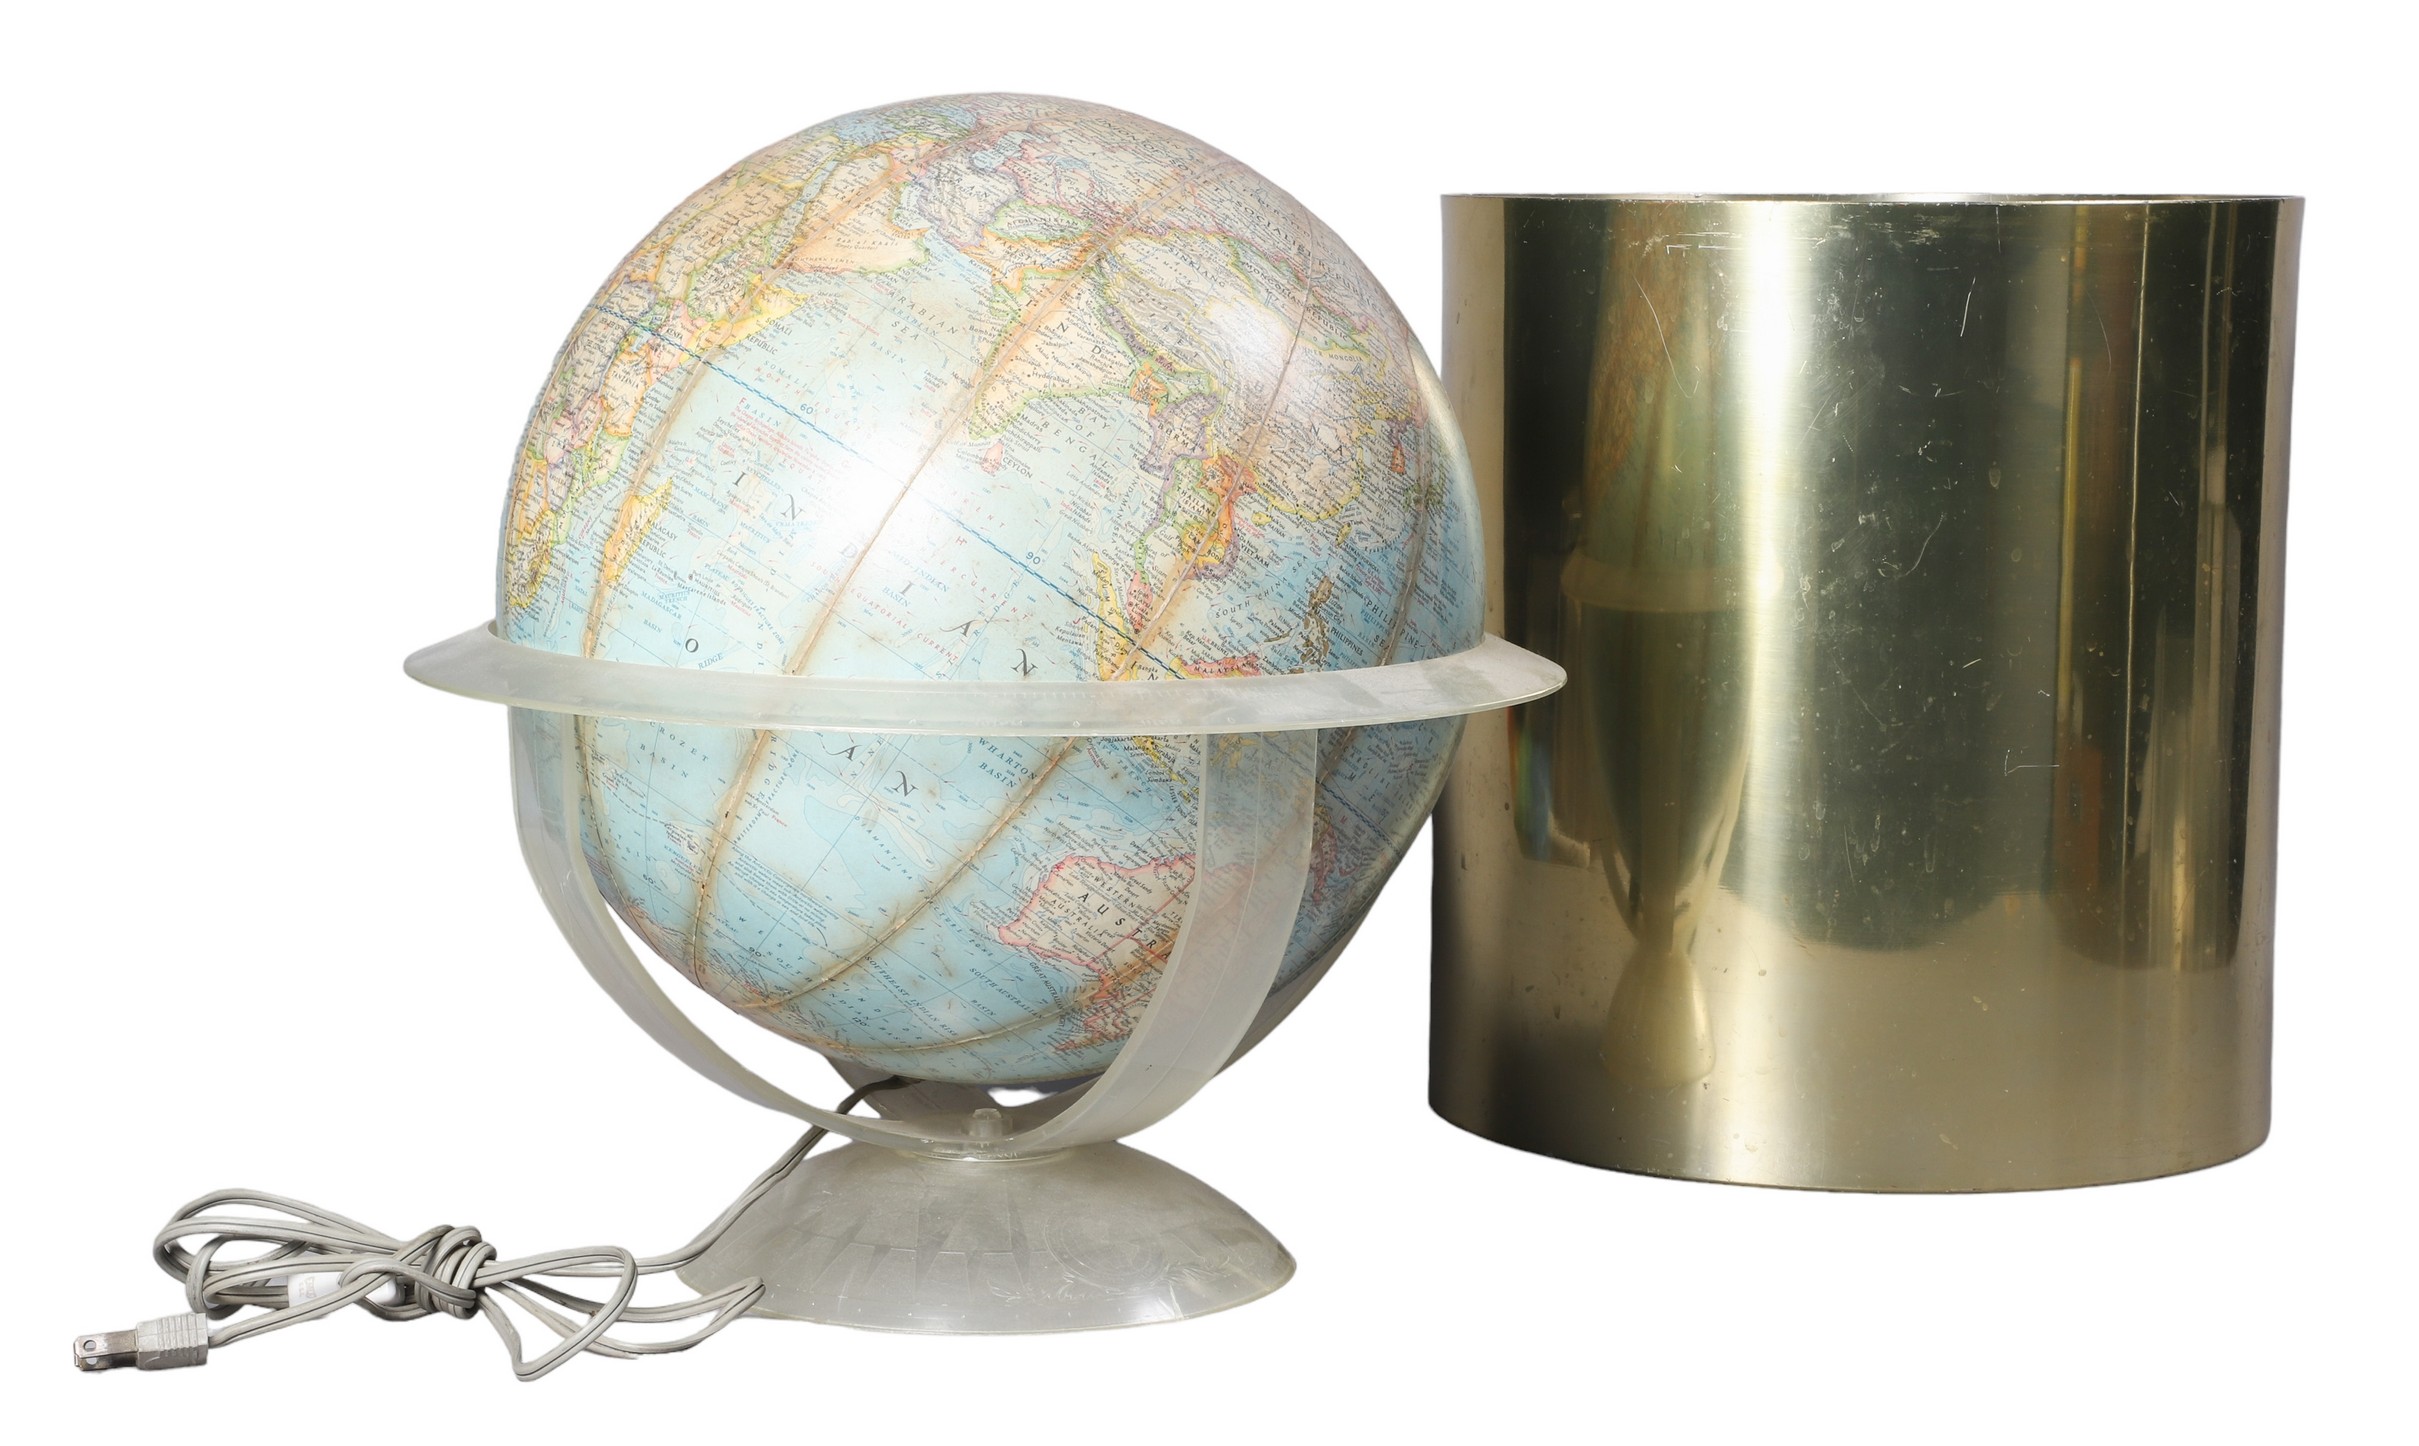 Lighted globe in stand and planter 2e0cce